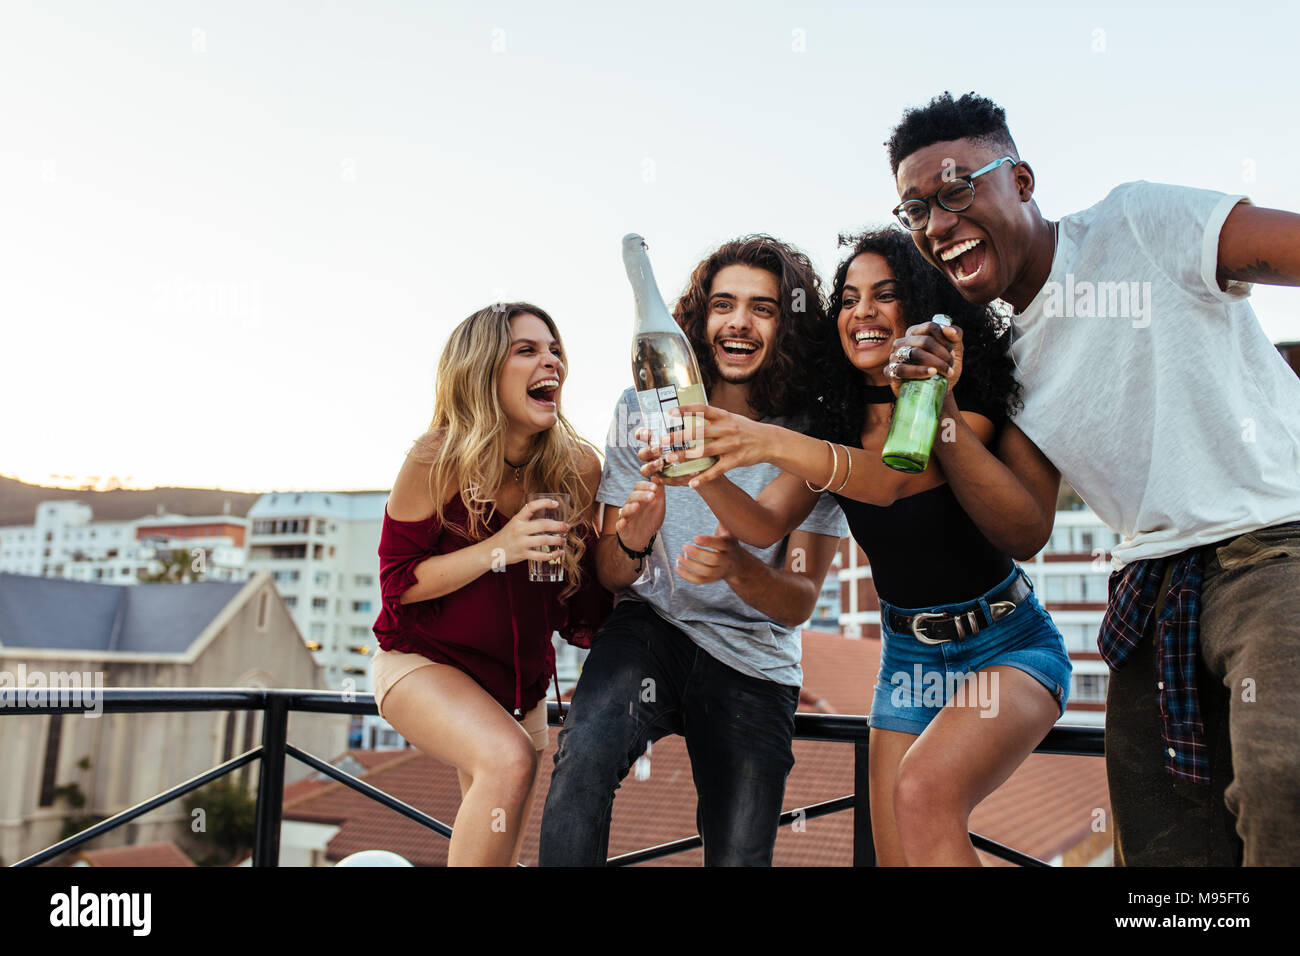 Outdoor shot of young woman opening a bottle of champagne with friends. Young people having champagne at rooftop party. Stock Photo